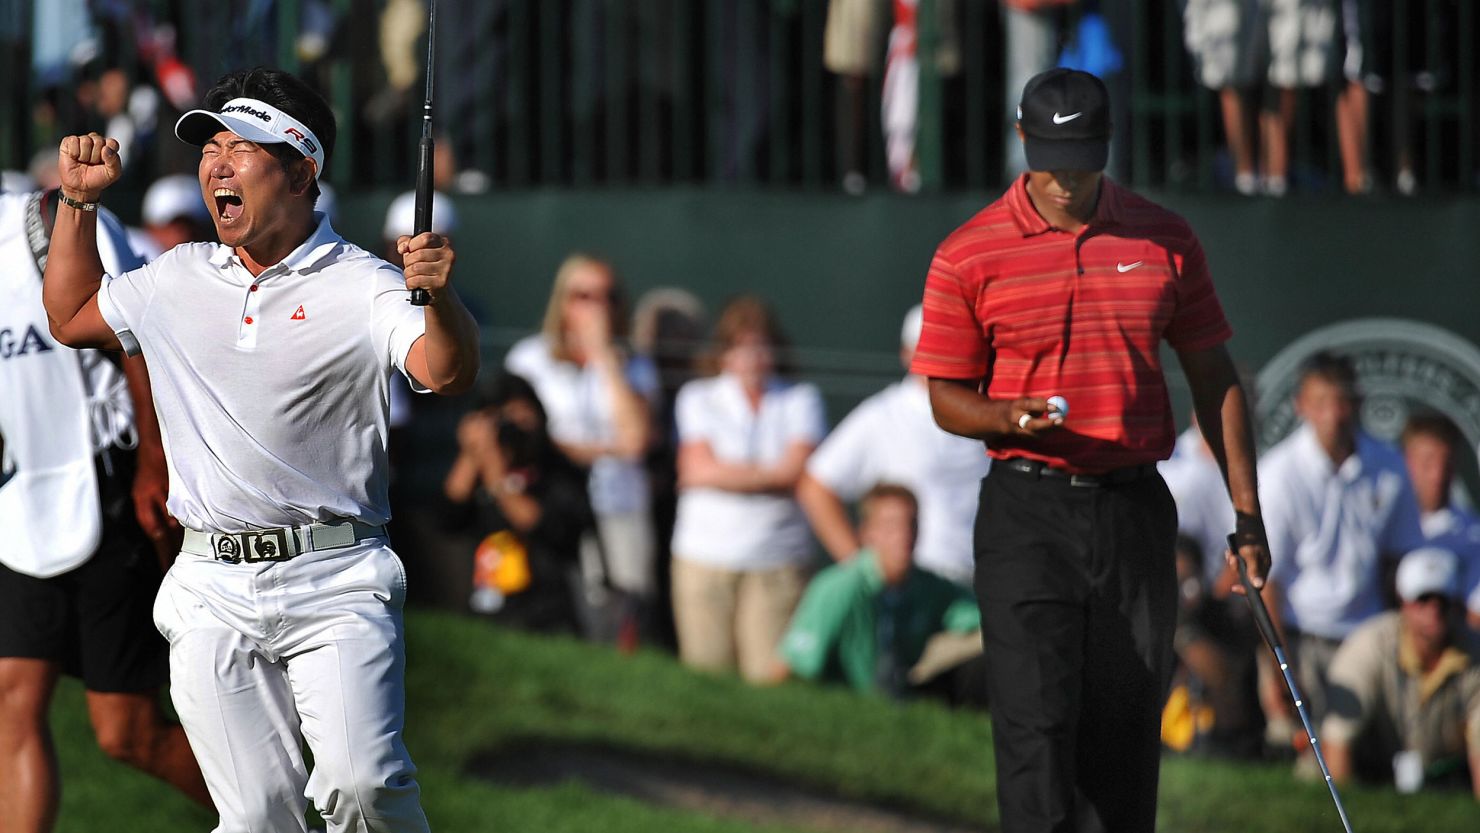 Y.E. Yang (left) celebrates after sinking his putt to beat Tiger Woods (right) to the 2009 PGA Championship title at Hazeltine National Golf Club in Chaska, Minnesota.